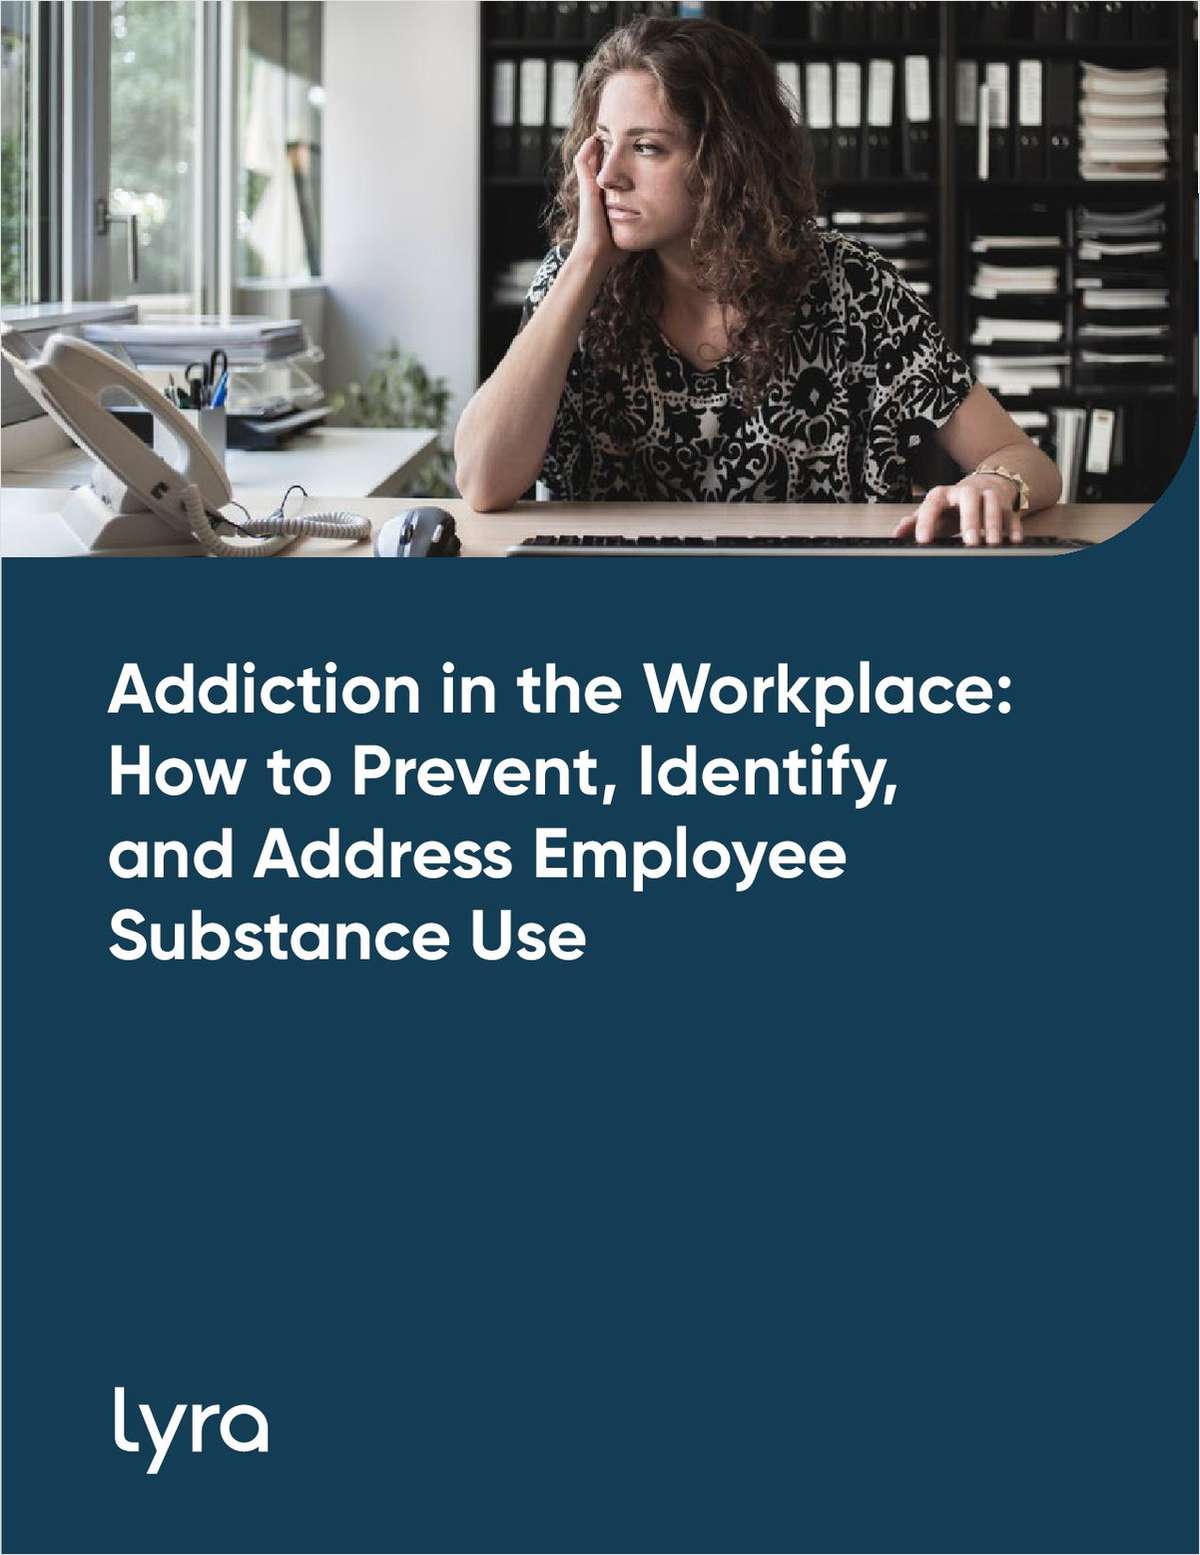 Addiction in the Workplace Report: How to Prevent, Identify, and Address Employee Substance Use Disorders